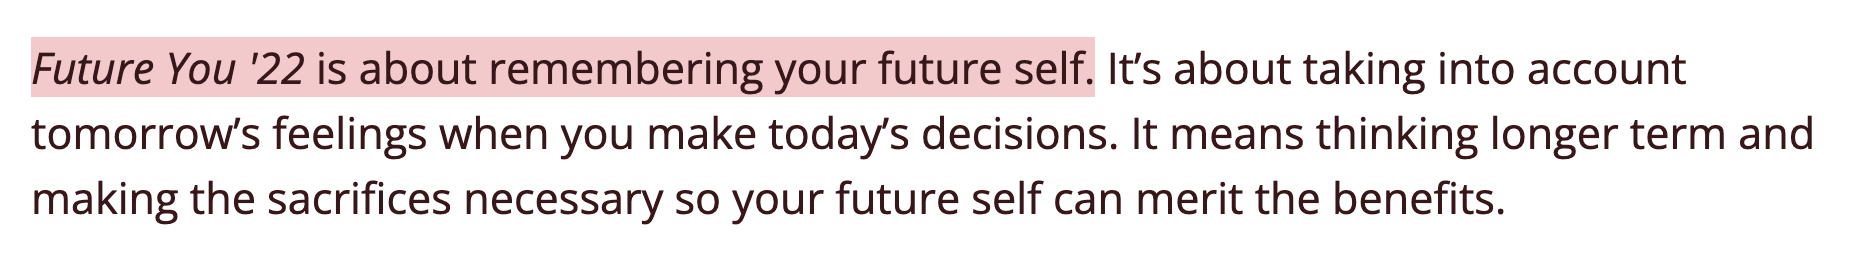 Future You '22 is about remembering your future self. It’s about taking into account tomorrow’s feelings when you make today’s decisions. It means thinking longer term and making the sacrifices necessary so your future self can merit the benefits.